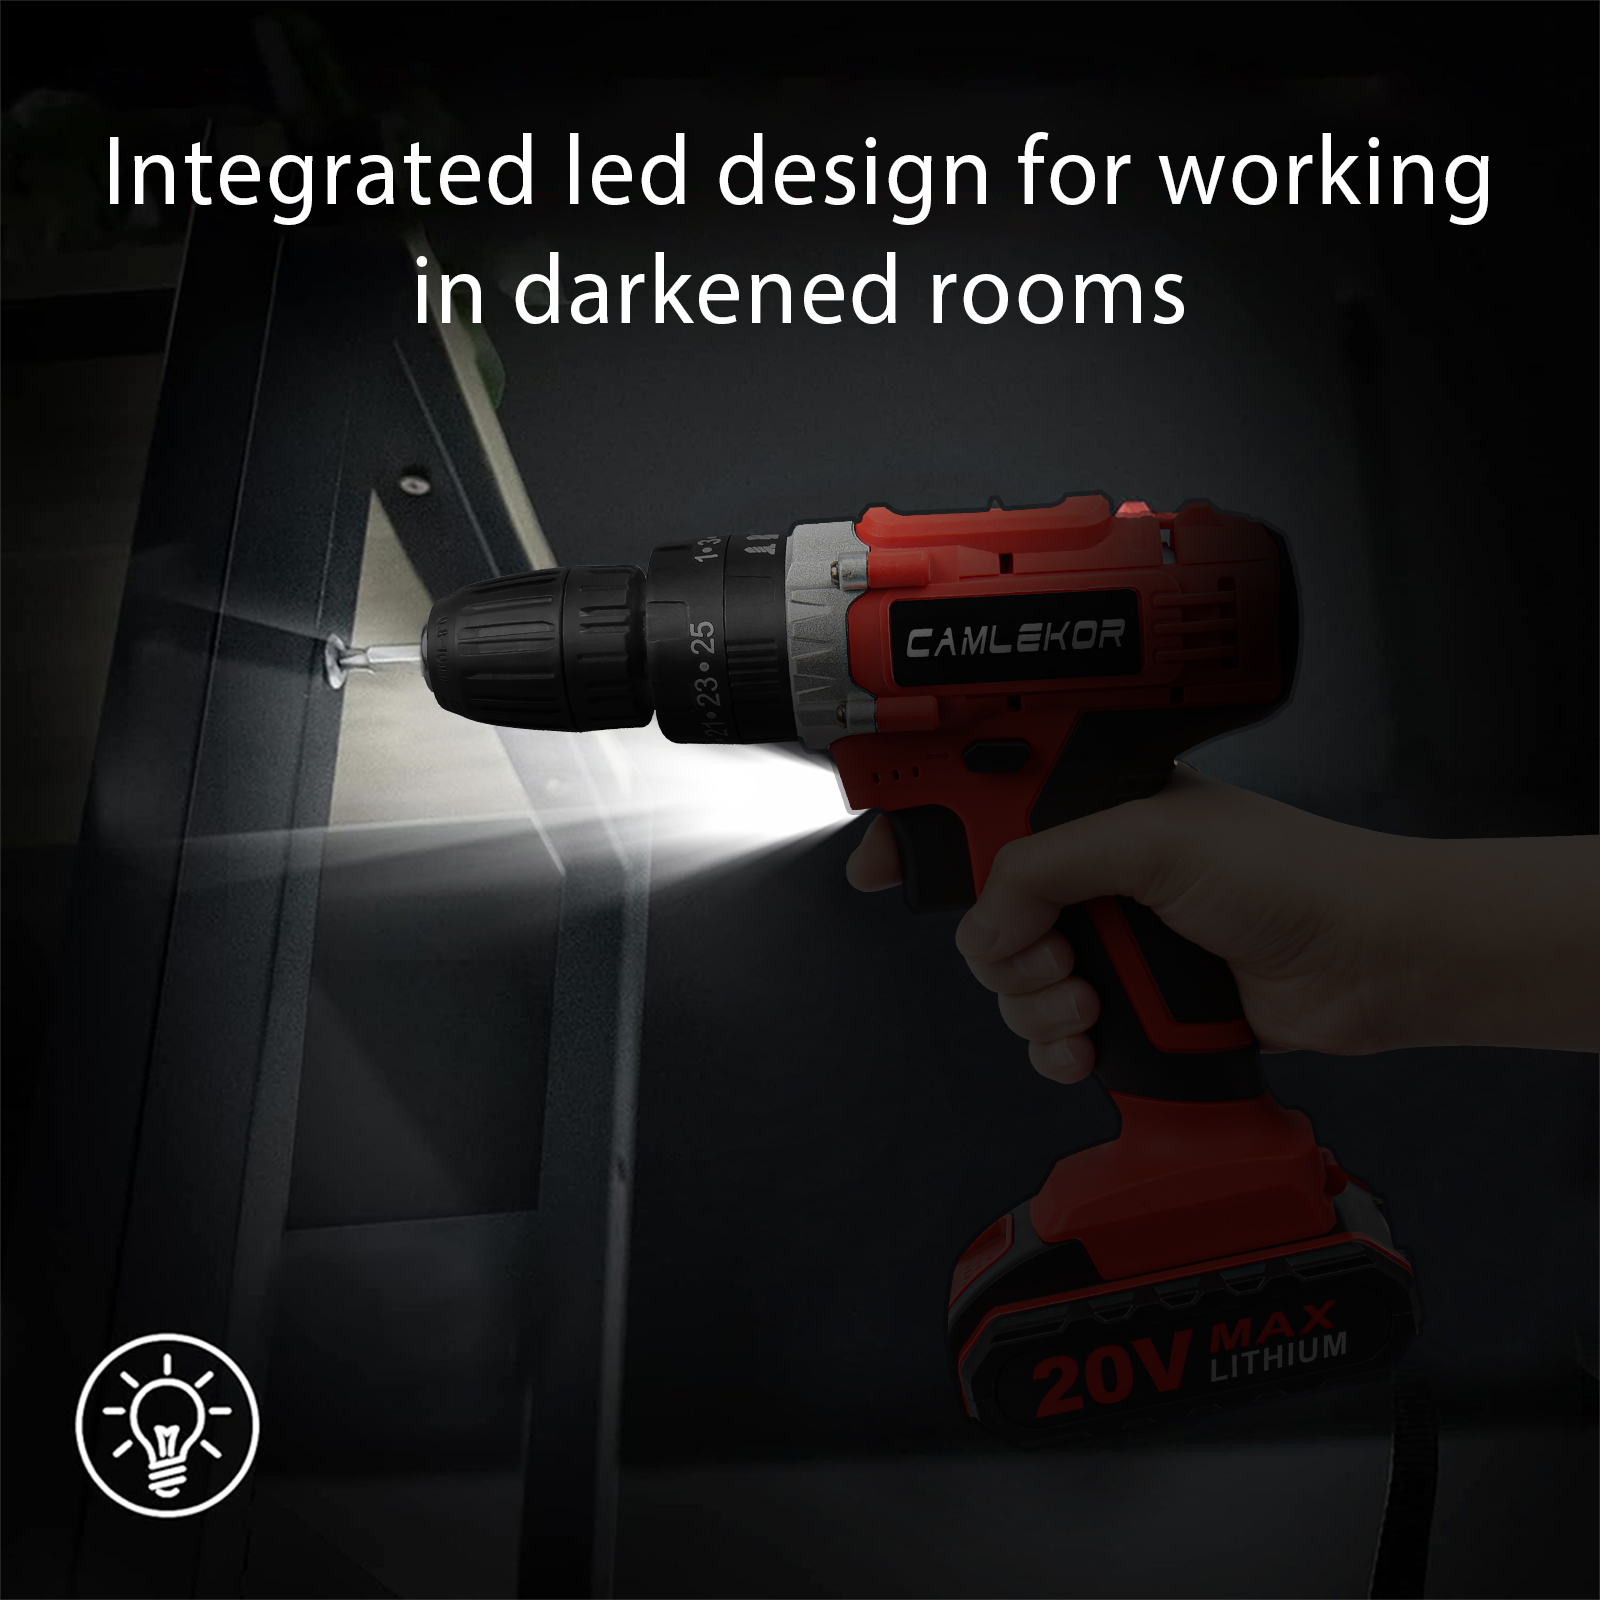 Camlekor Cordless Drill 20V, Electric Power Drill Set 3/8'' Impact Drill, 2 Variable Speeds & 25+3 Position Setting with LED Work Light - image 2 of 8